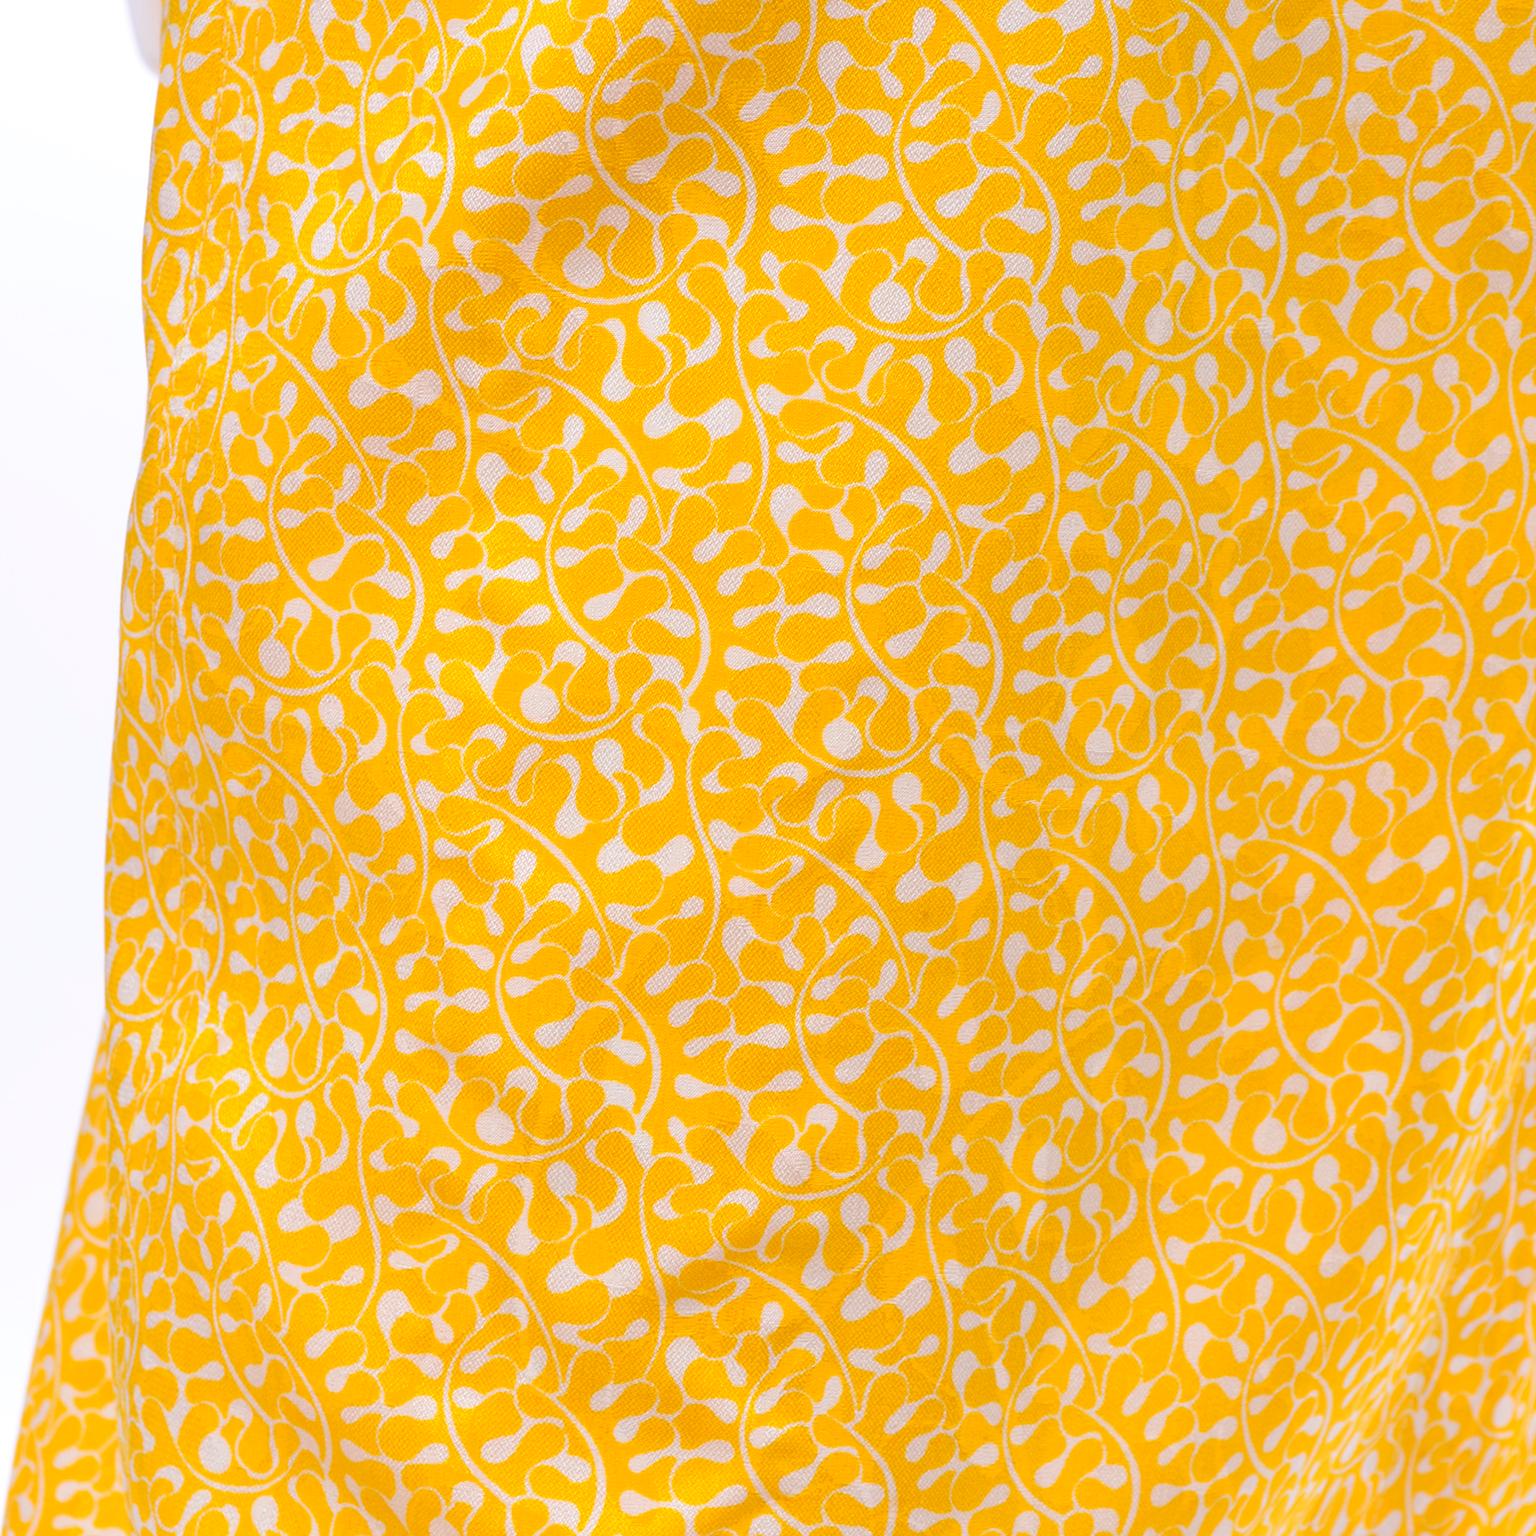 Women's Vintage Ungaro Parallele Rayon Dress in Yellow & White Print For Sale